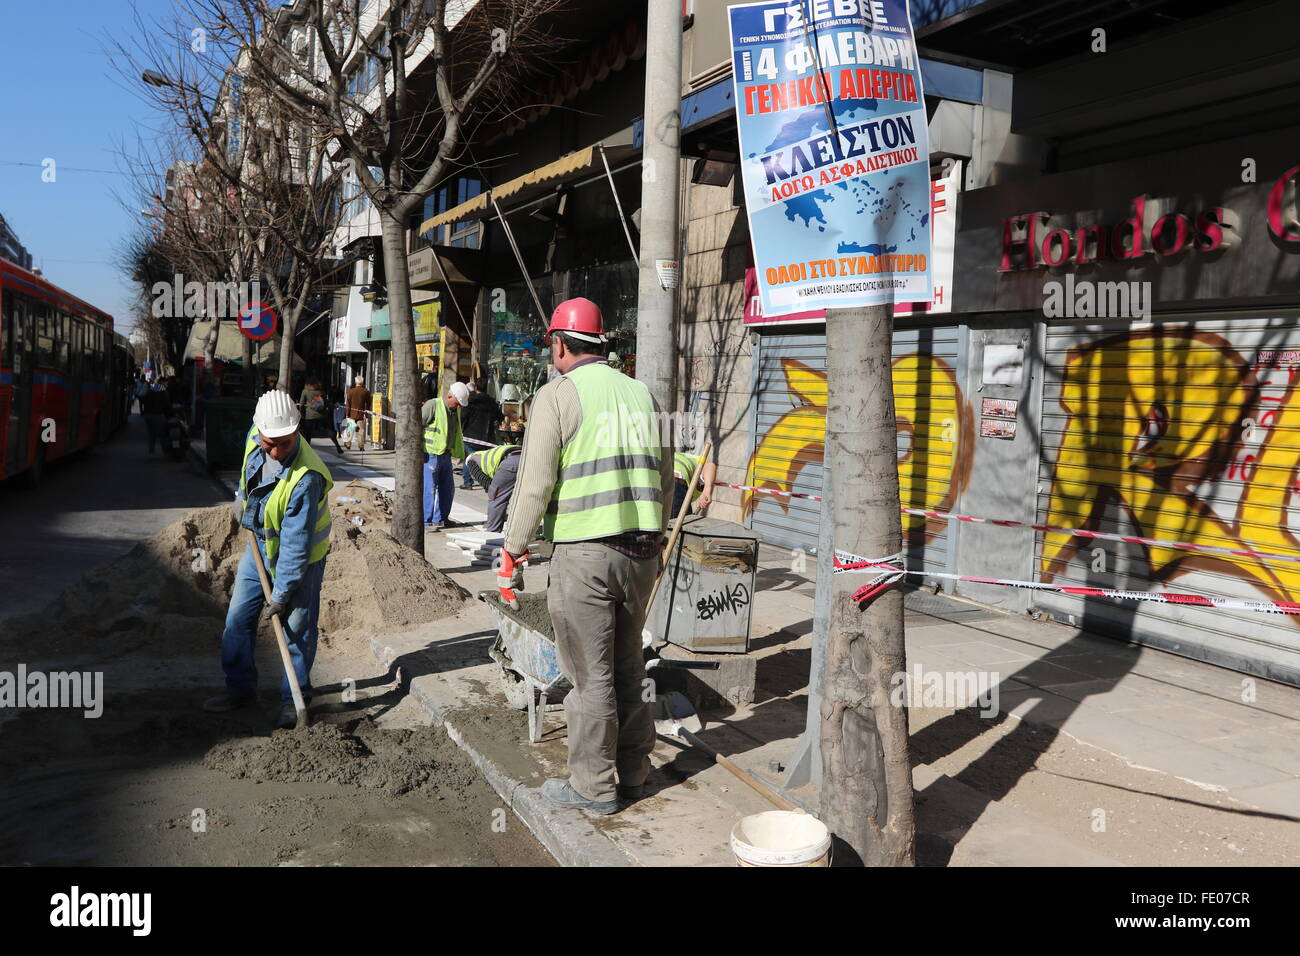 Thessaloniki, Greece. 3rd February 2016. Workers repair a pavement in front of a poster announcing a general strike and a rally. Greek public and private sector unions called for a nationwide general on Thursday to protest againts government's planned pension reforms that are part of the country's 3rd international bailout. Public transport is excepted to be severely disrupted, and taxi drivers are expected to join the action. Credit:  Orhan Tsolak/Alamy Live News Stock Photo